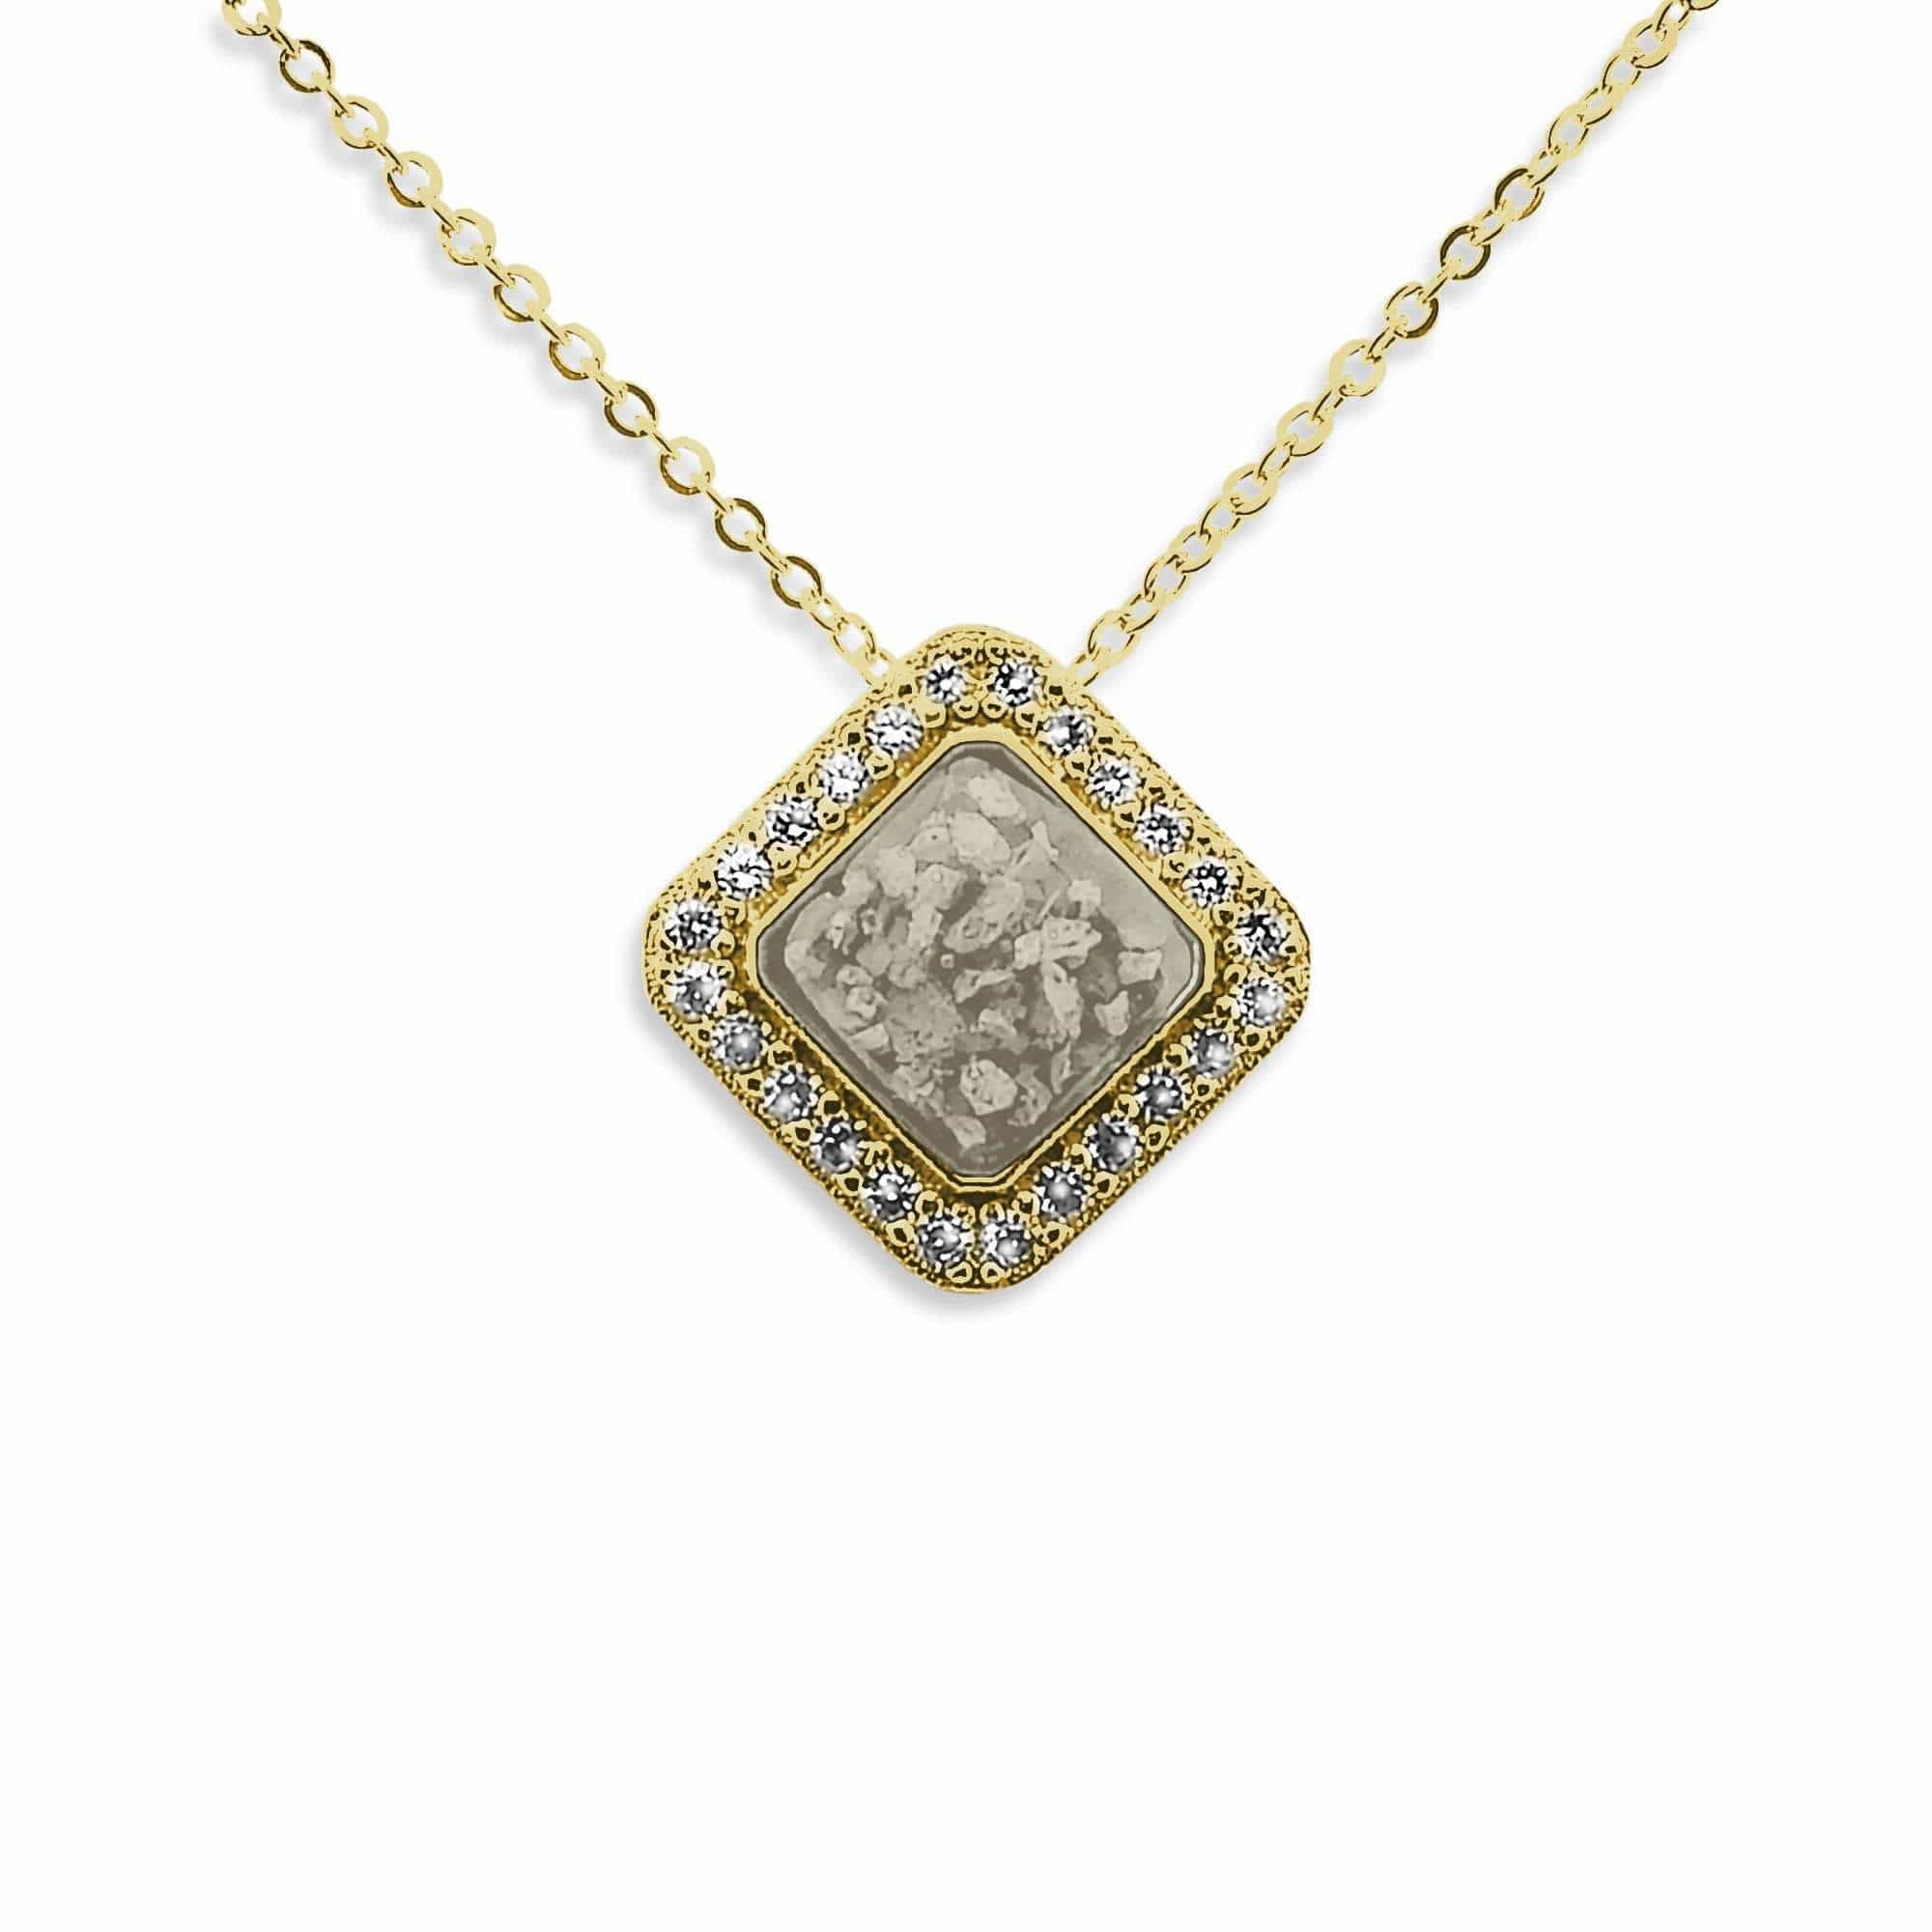 EverWith Ladies Bless Memorial Ashes Pendant with Fine Crystals